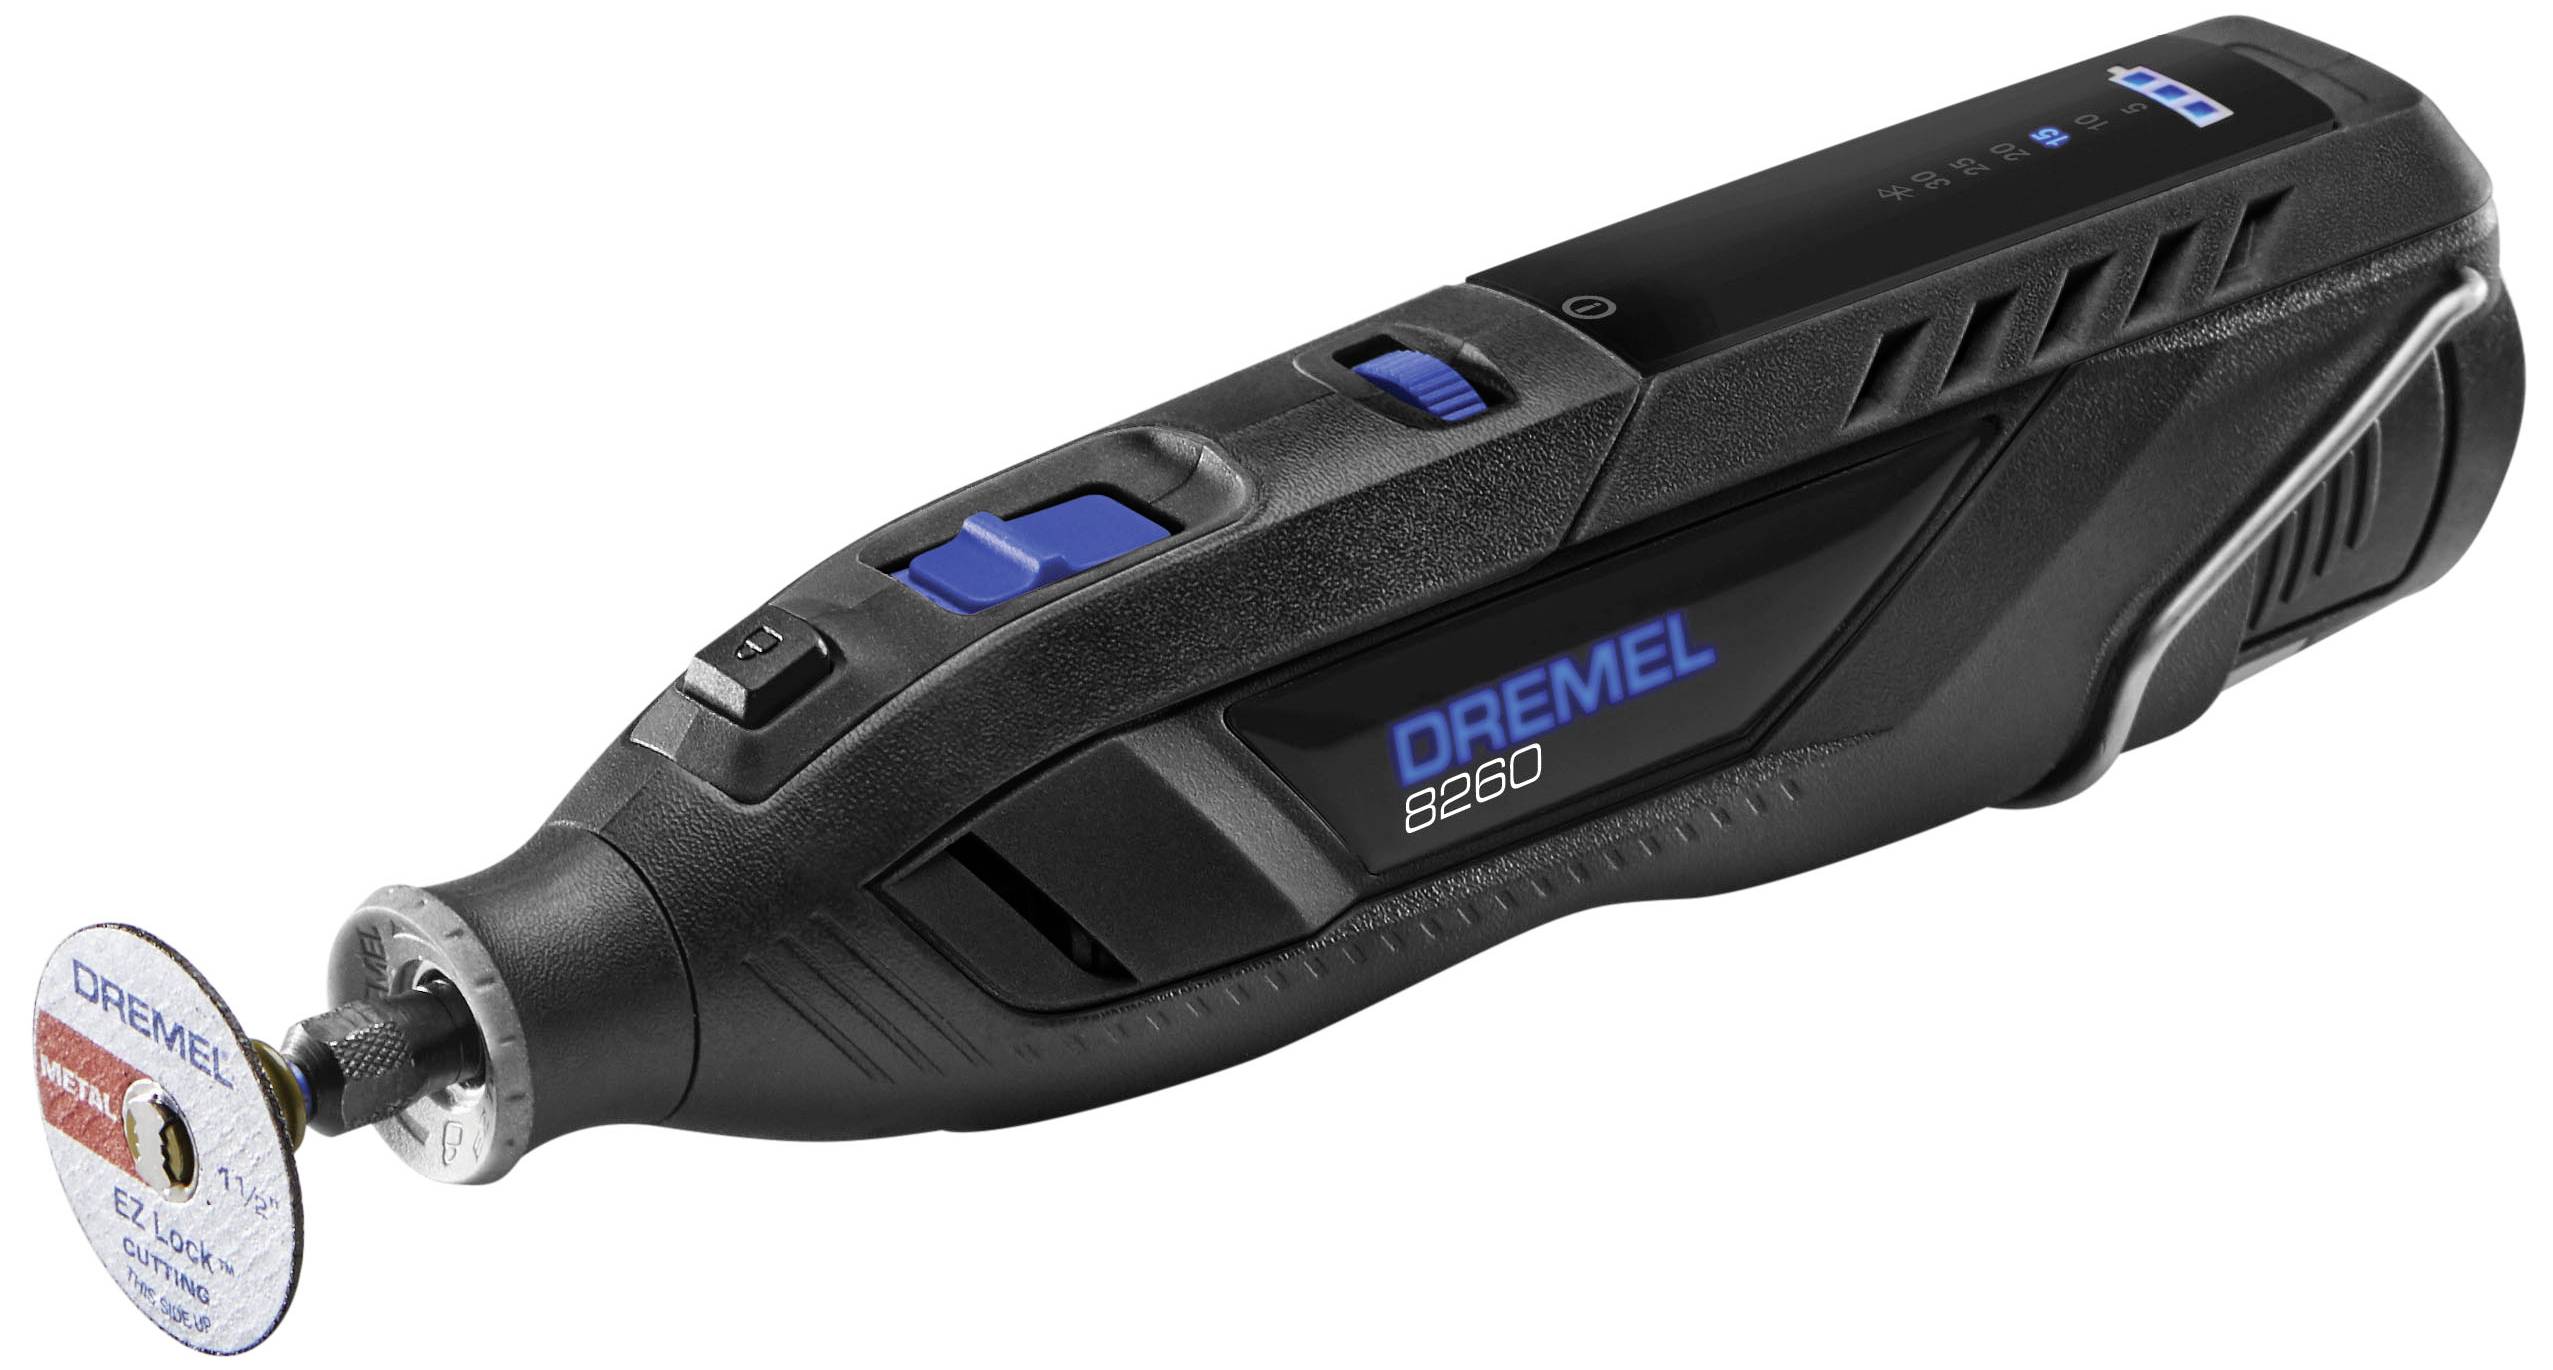 Dremel 8260 F0138260JA Multifunction rechargeables, incl. charger, incl. accessories 1-piece 12 V 3 Ah | Conrad.com